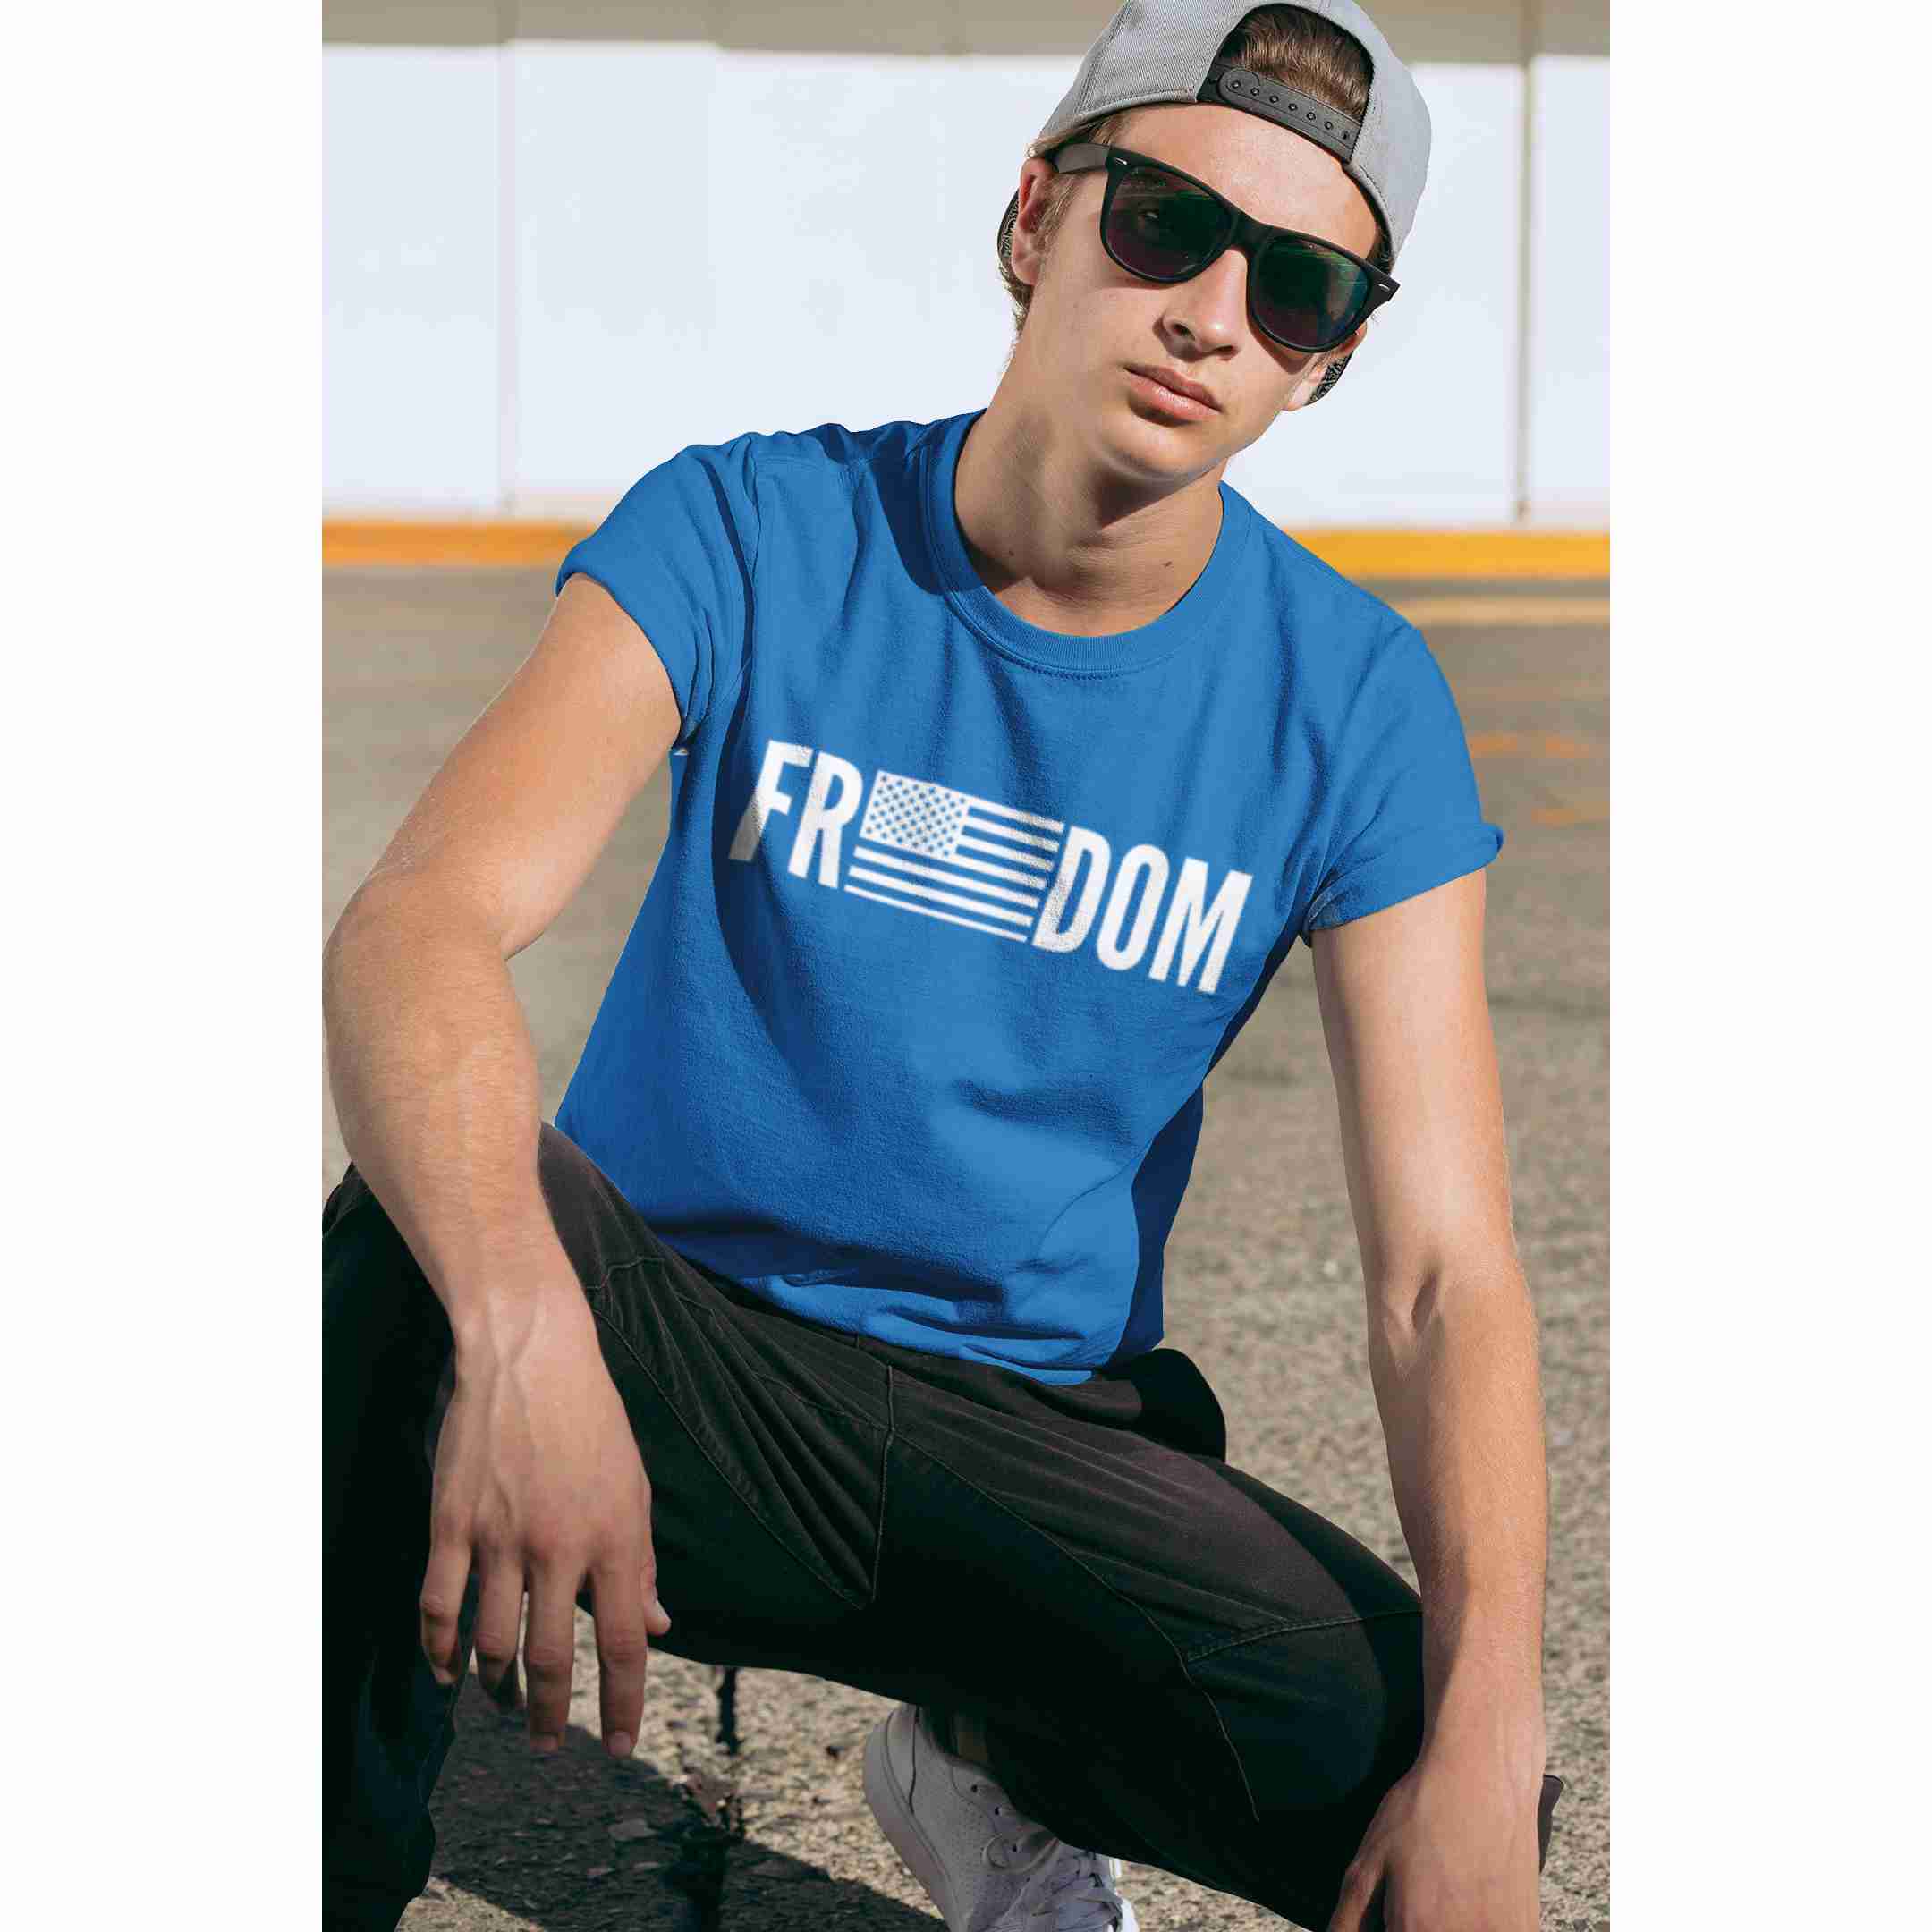 freedom-shirt with cash back rebate